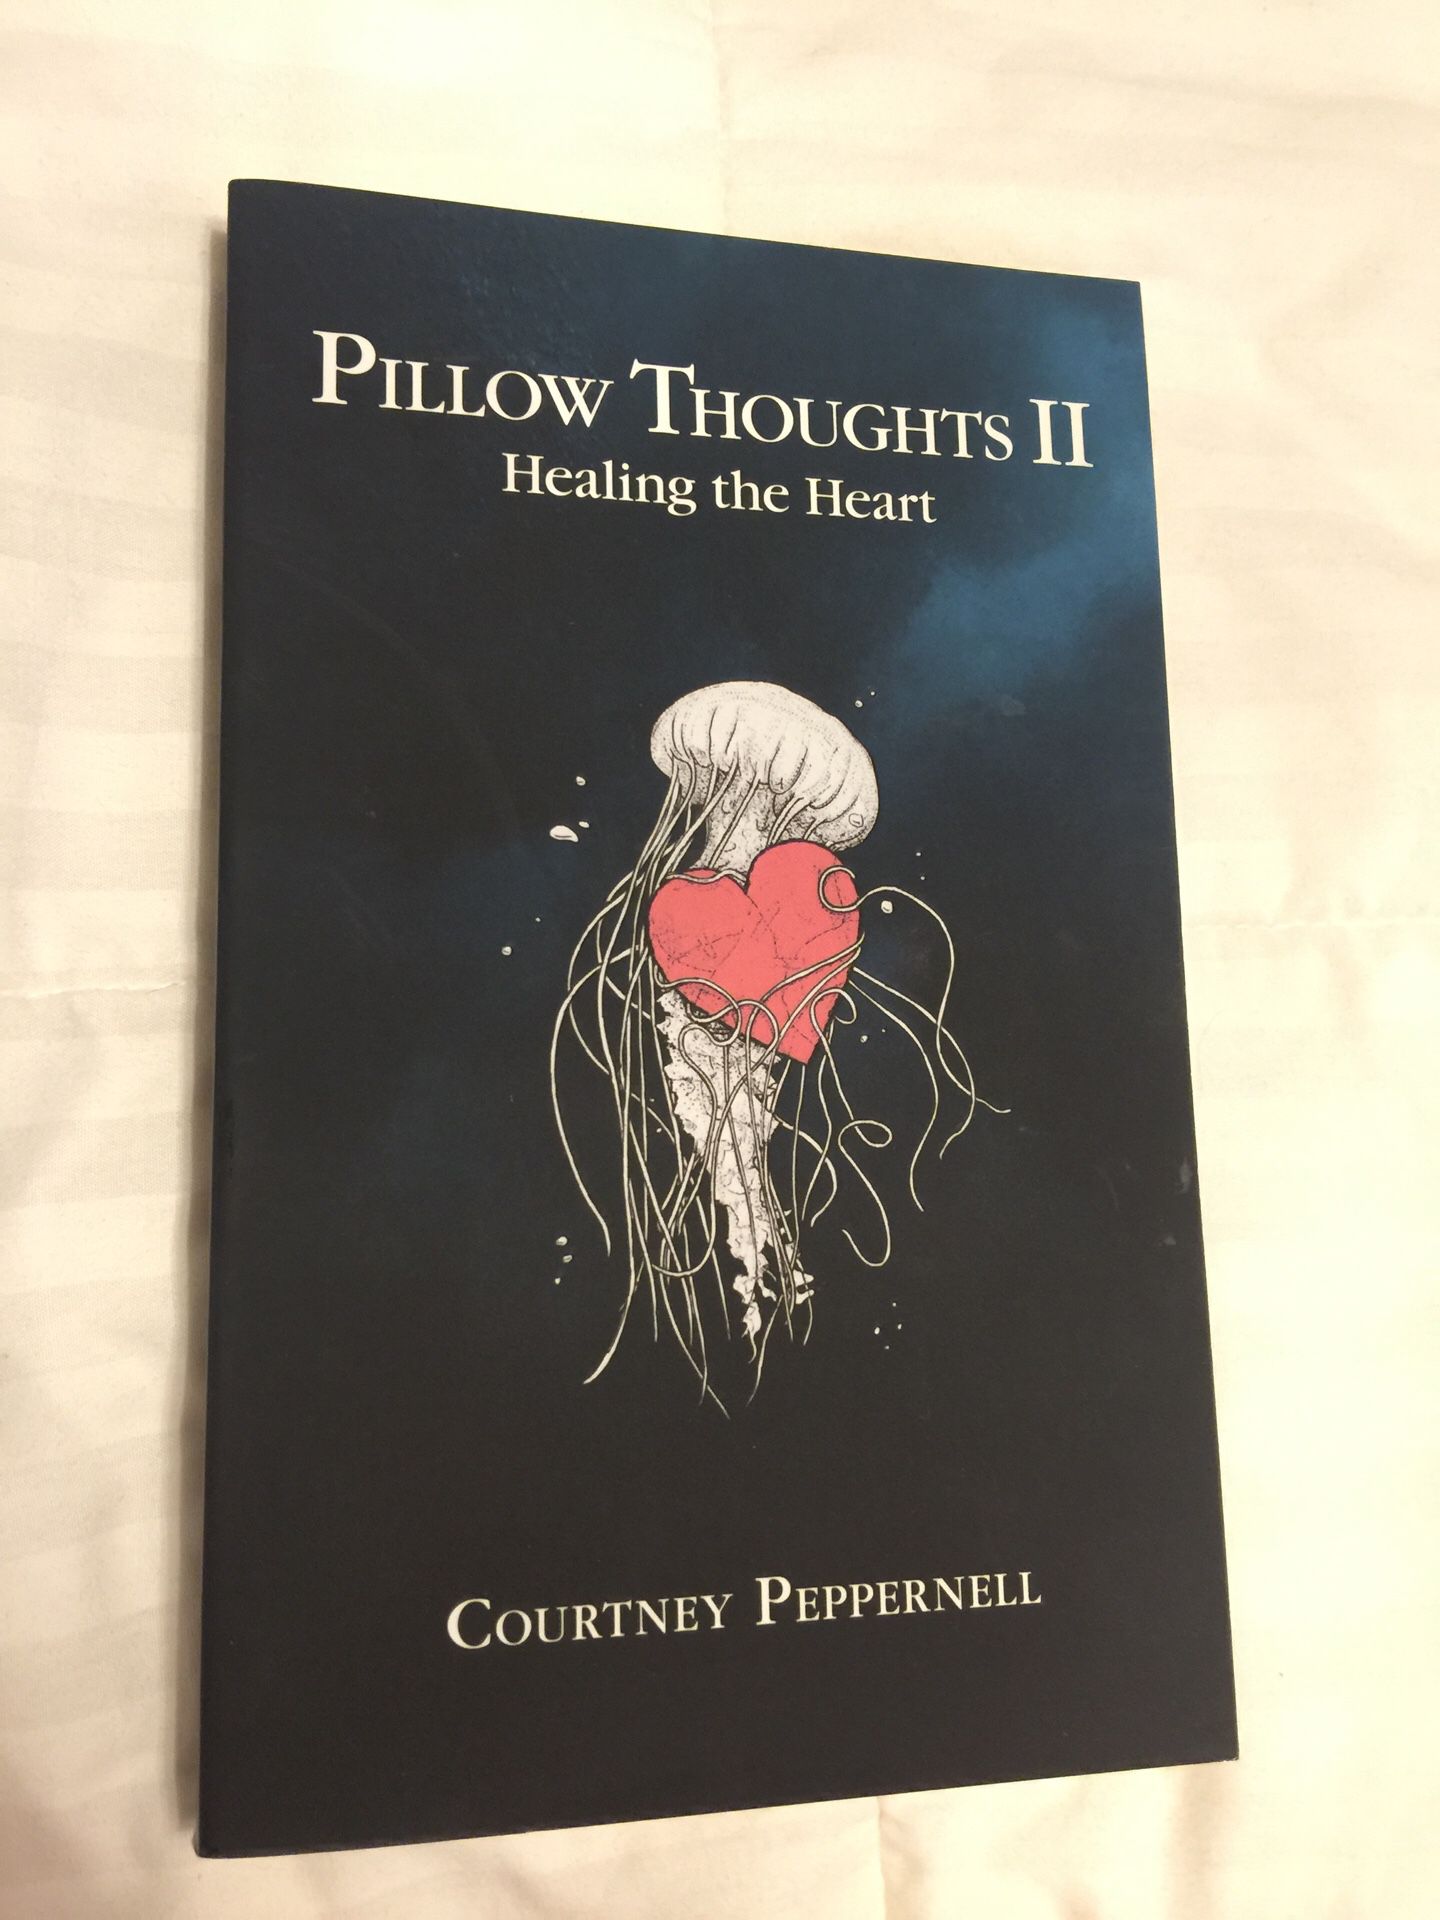 Pillow Thoughts 2: Healing the Heart by Courtney Peppernell